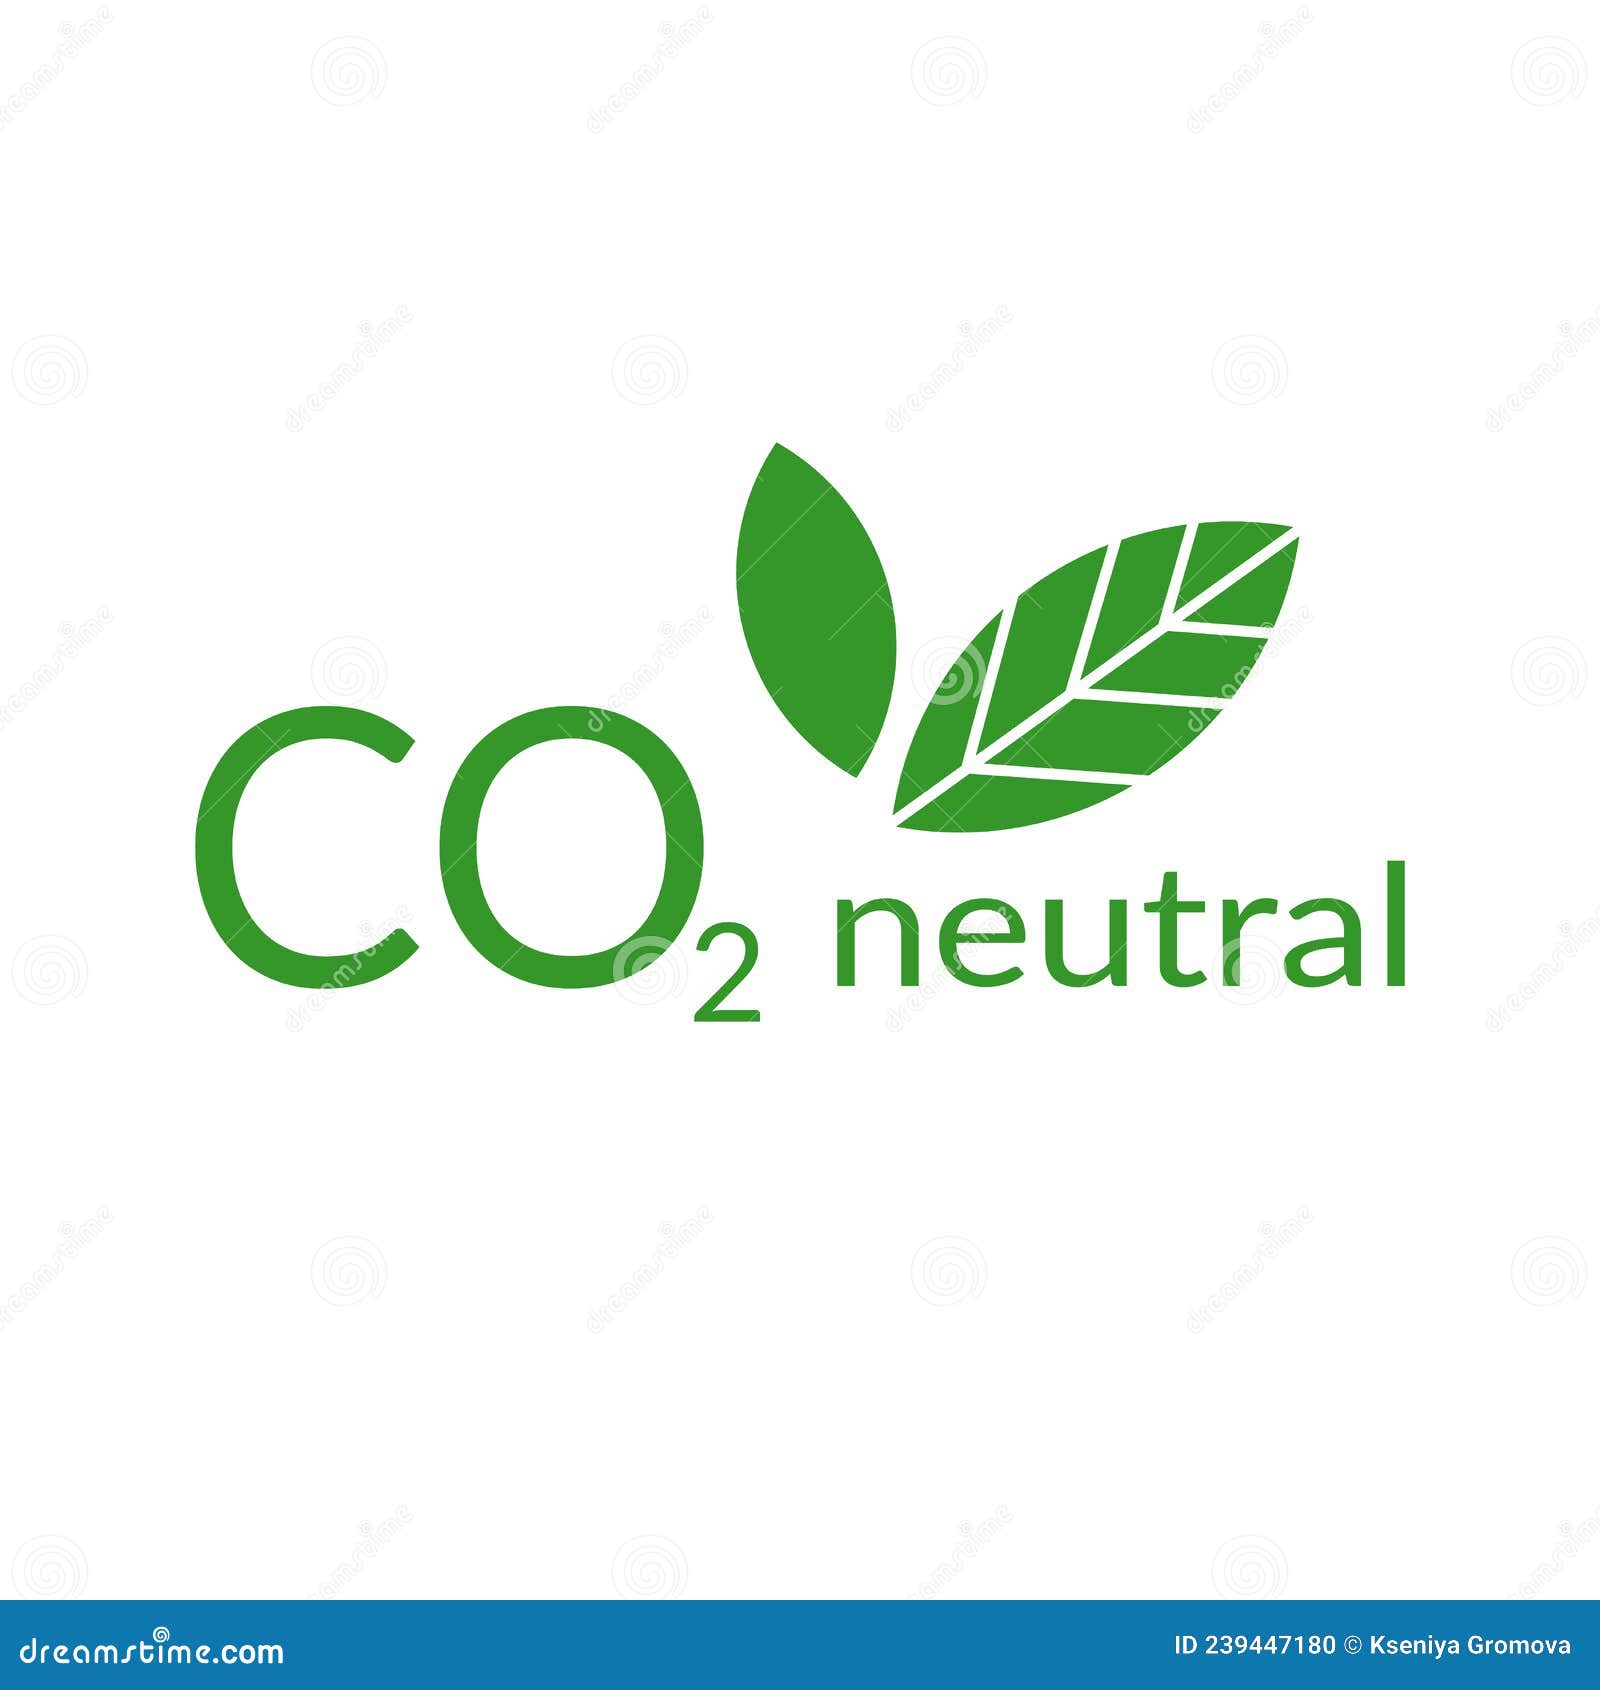 co2 neutral stamp, label